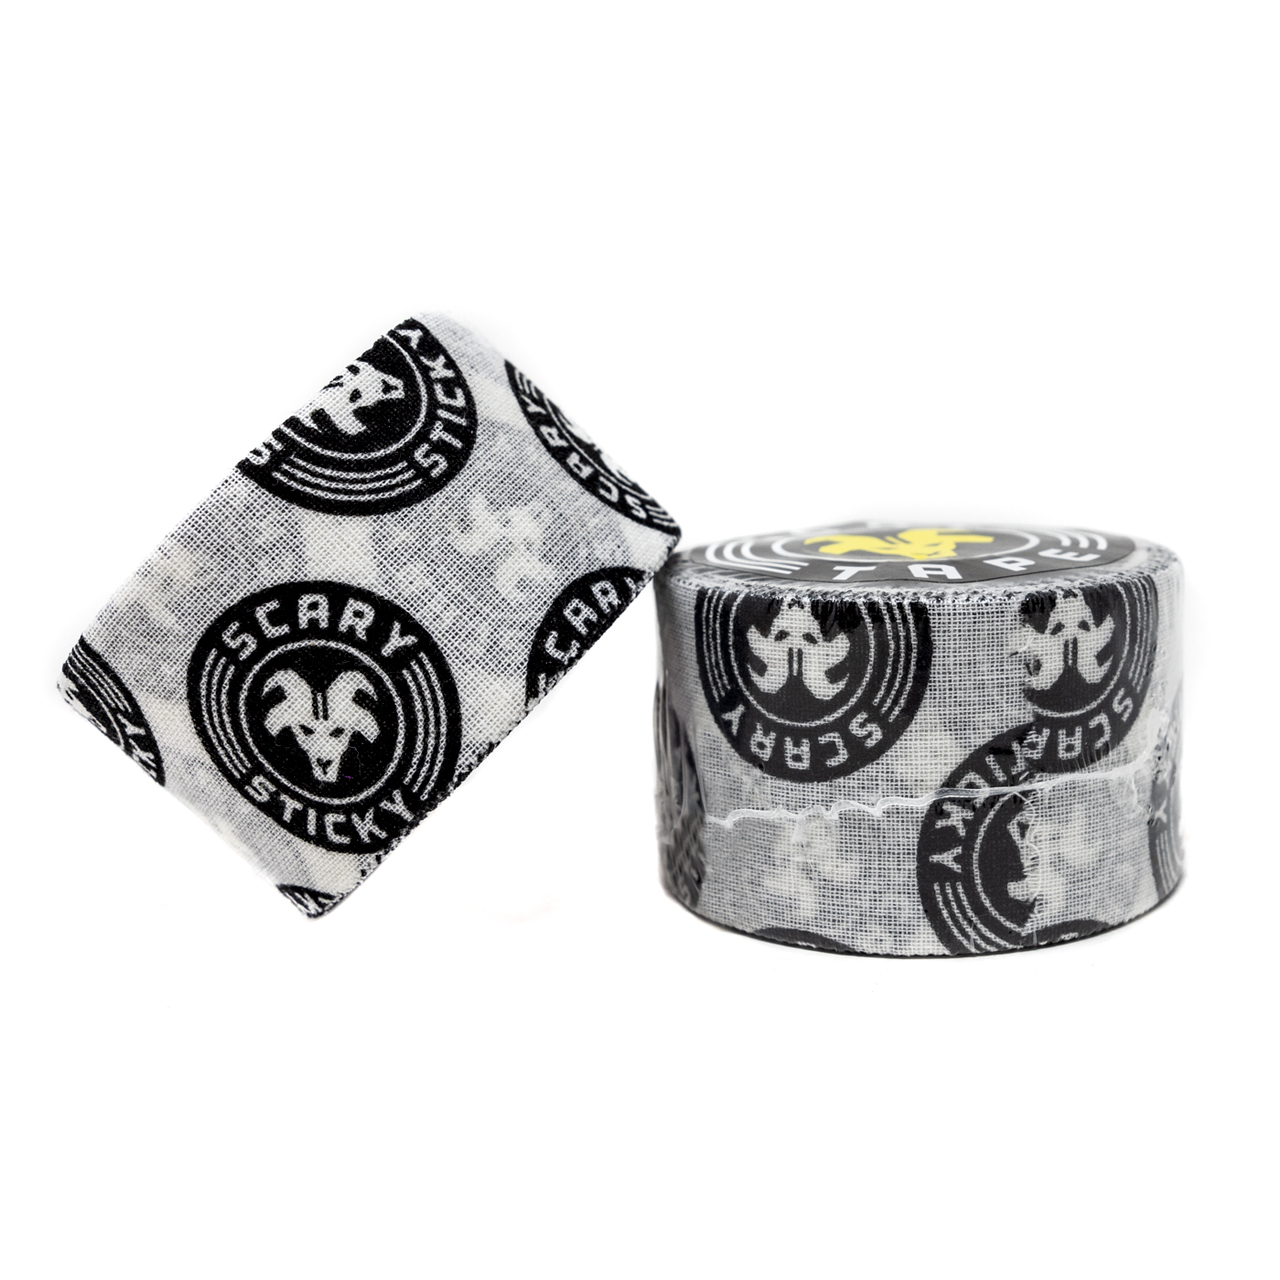 Goat Tape Scary Sticky Premium Athletic/Weightlifting Tape White Black